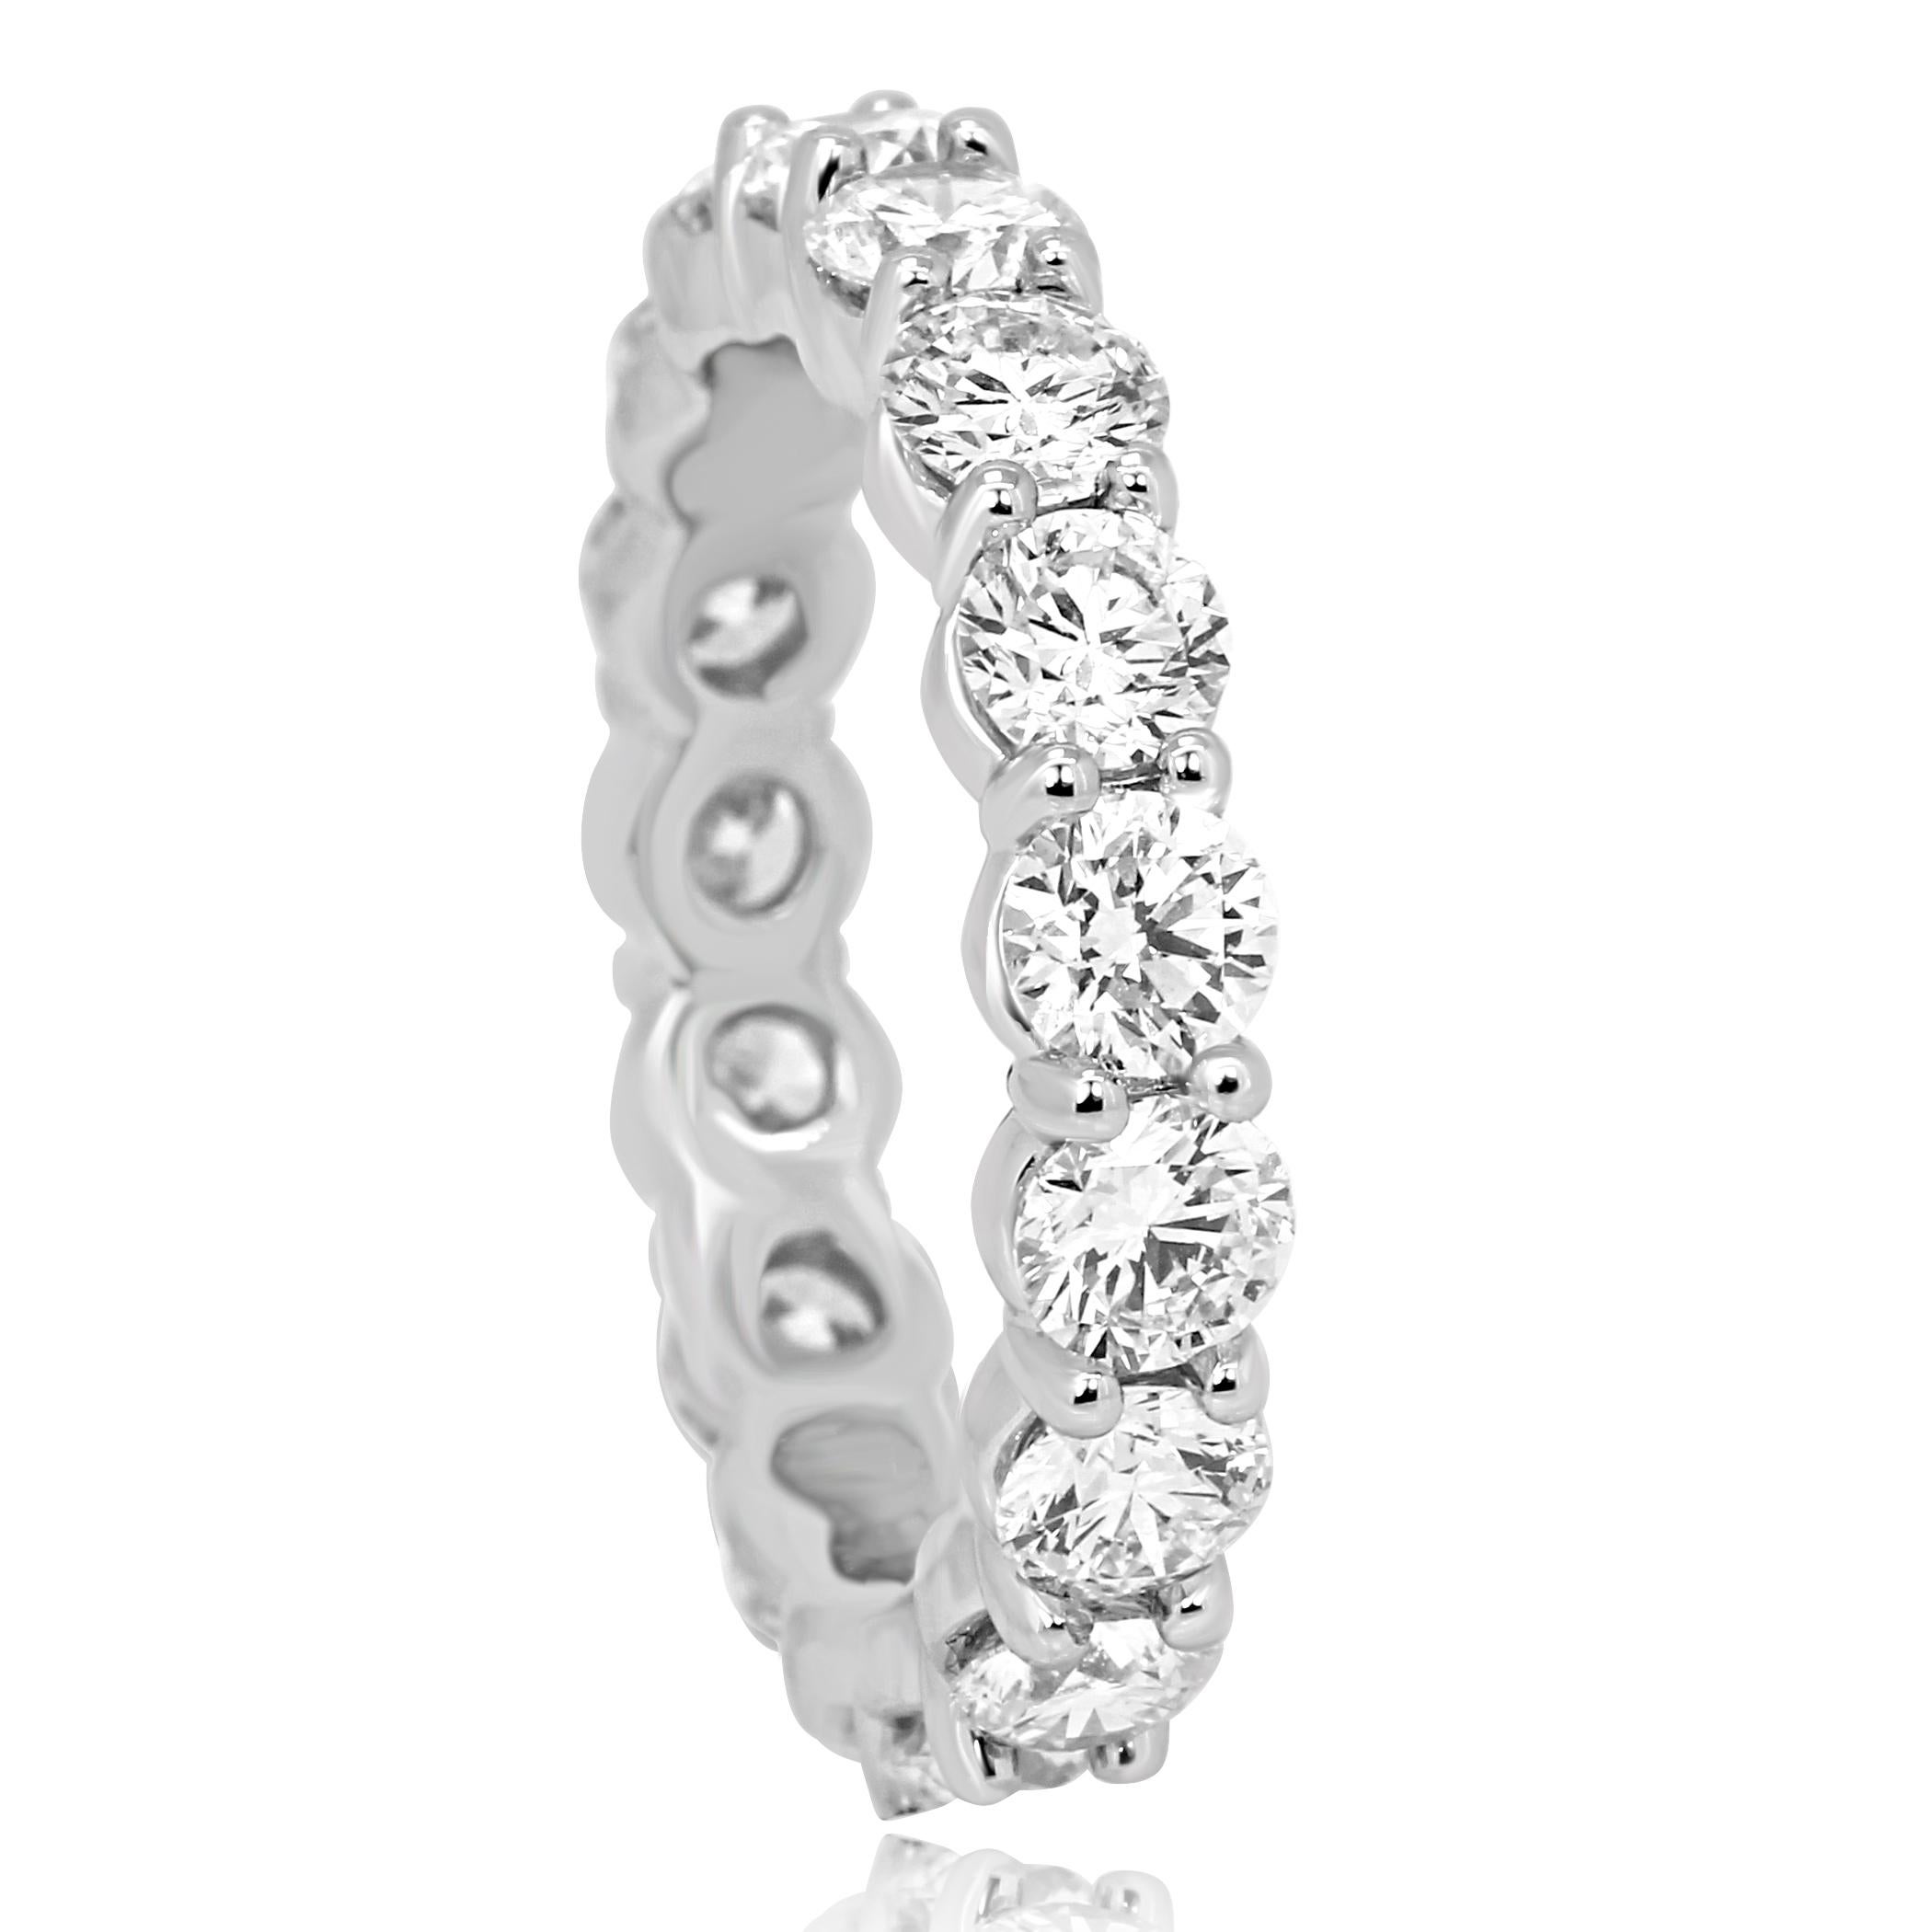 White Diamond Rounds G-H Color Vs clarity 3.00 Carat in Gorgeous Platinum Eternity Band Ring.

Style available in different price ranges. Prices are based on your selection of 4C's Cut, Color, Carat, Clarity. Please contact us for more